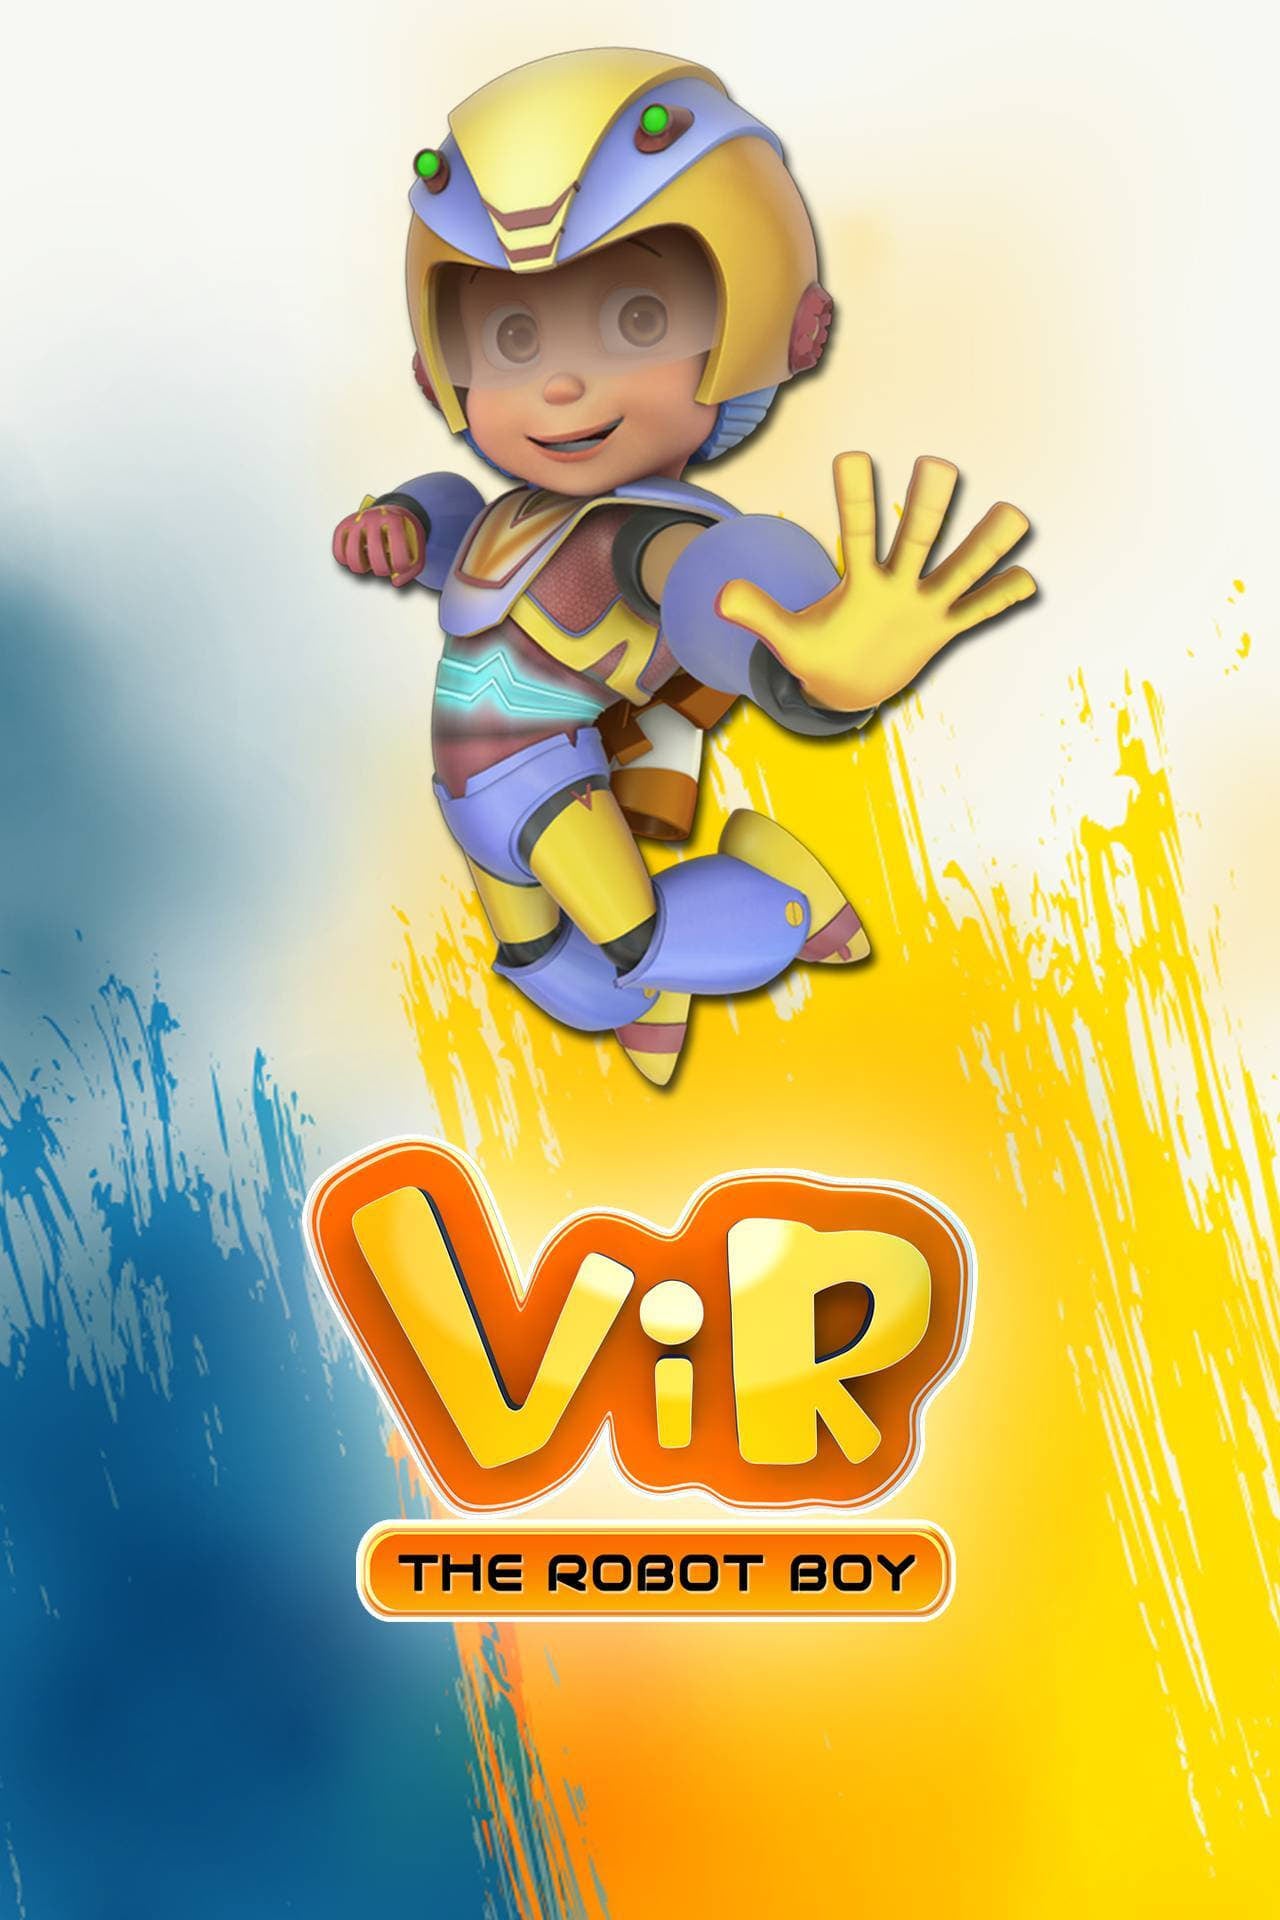 ViR: The Robot Boy (Hungama TV): Chile daily TV audience insights for  smarter content decisions - Parrot Analytics